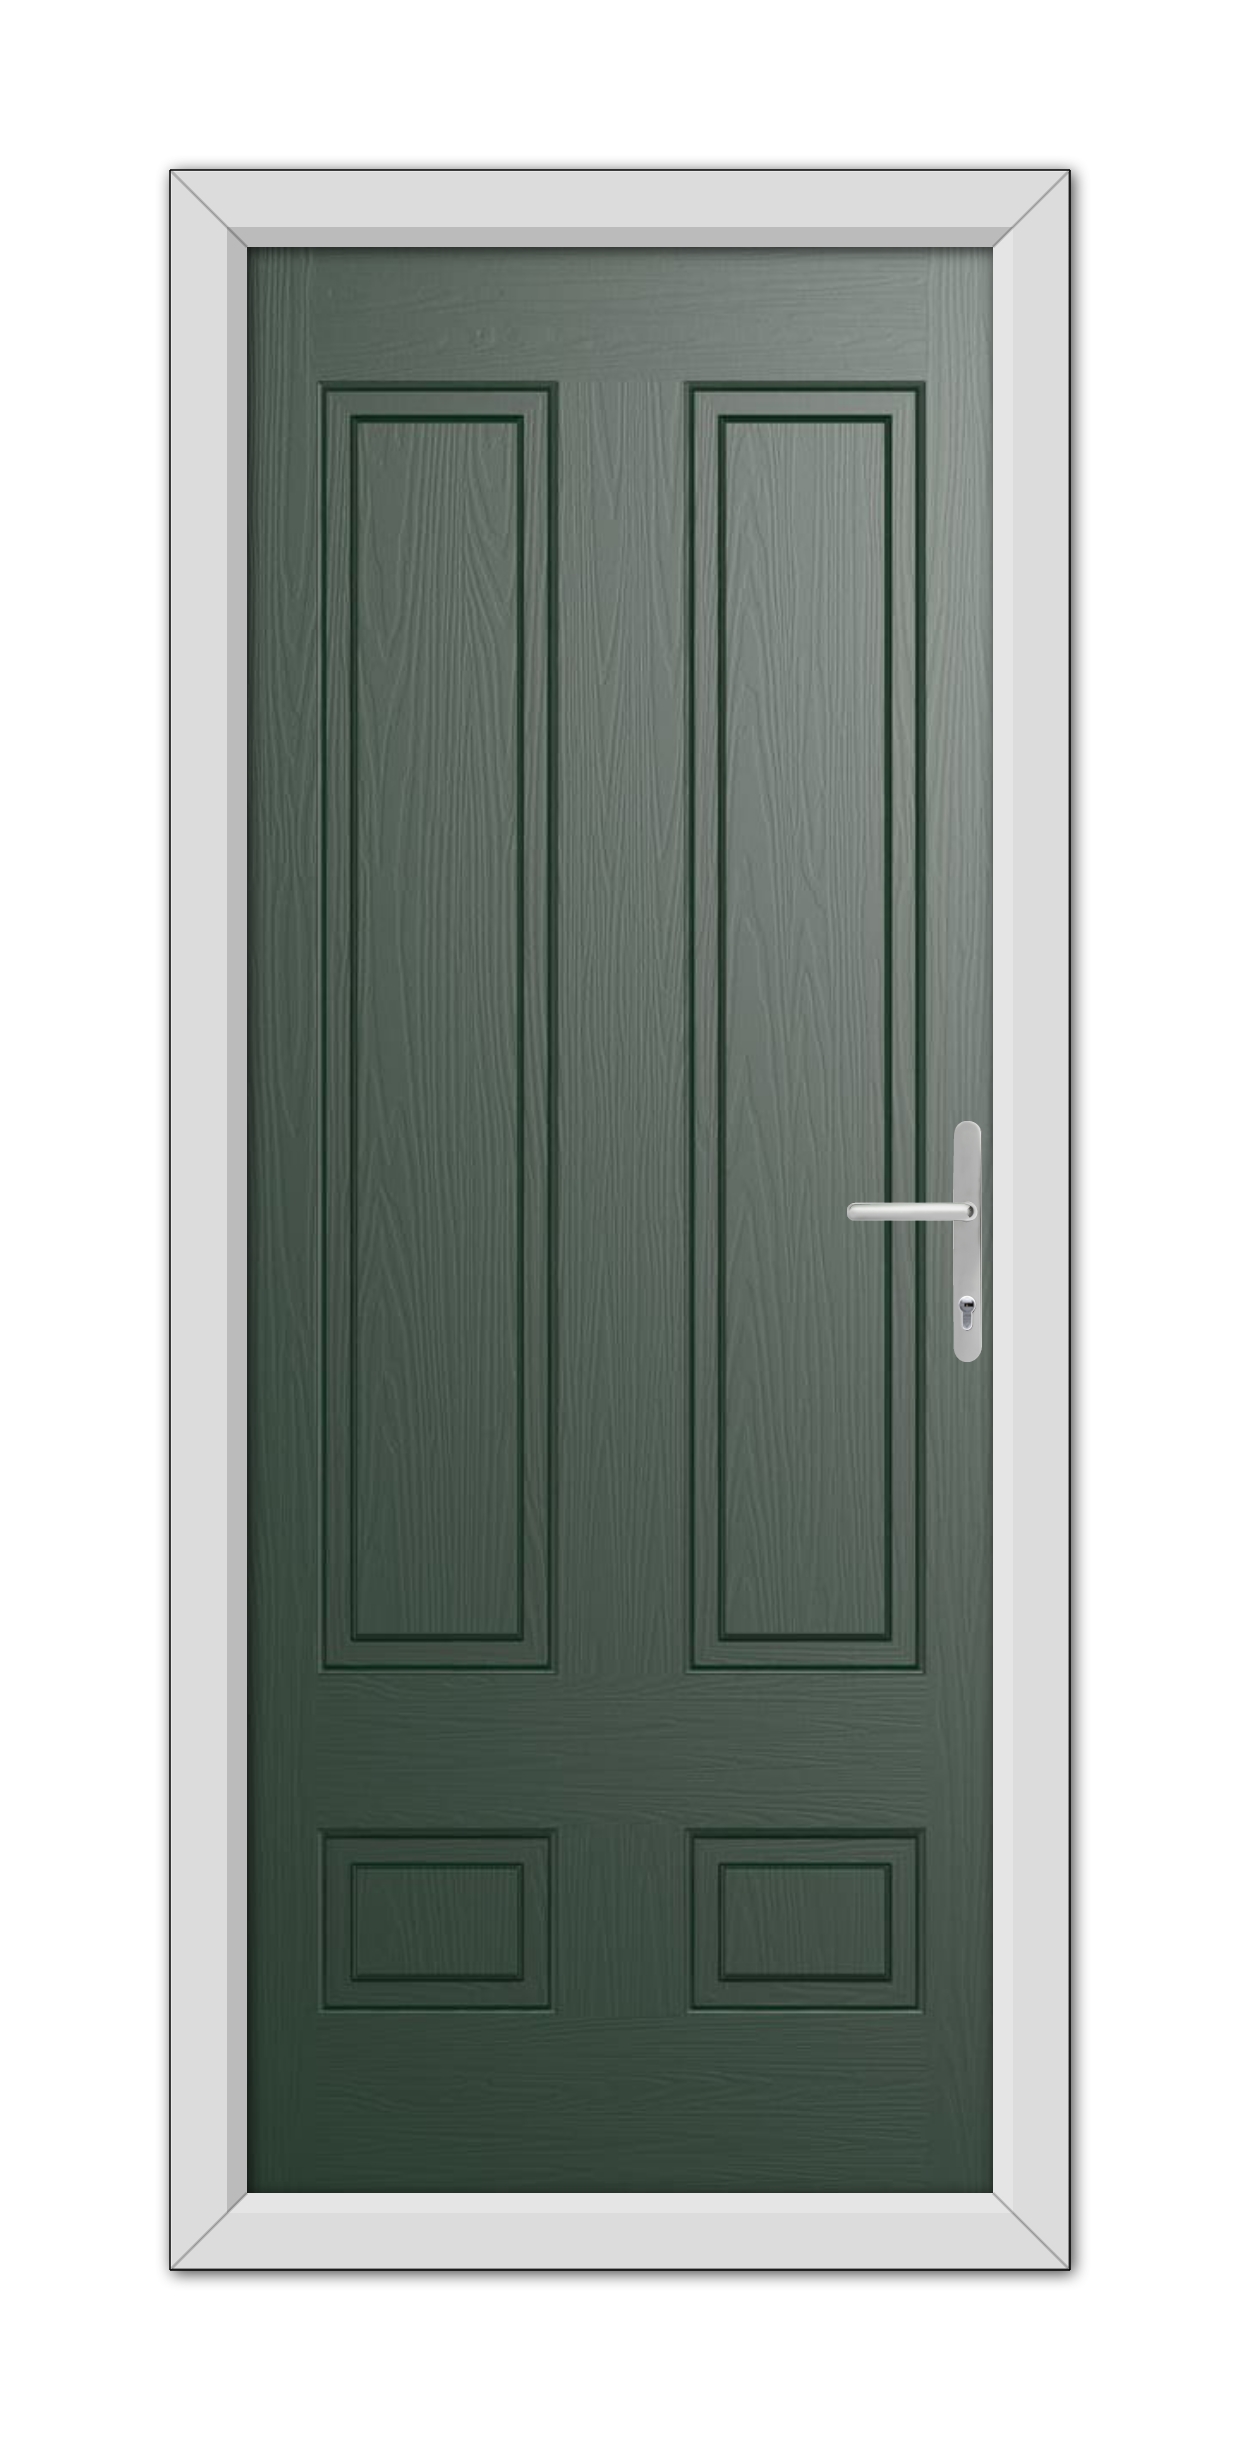 A double wooden door painted in Green Aston Solid Composite Door 48mm Timber Core, featuring a vertical four-panel design with a white handle, set in a white frame.